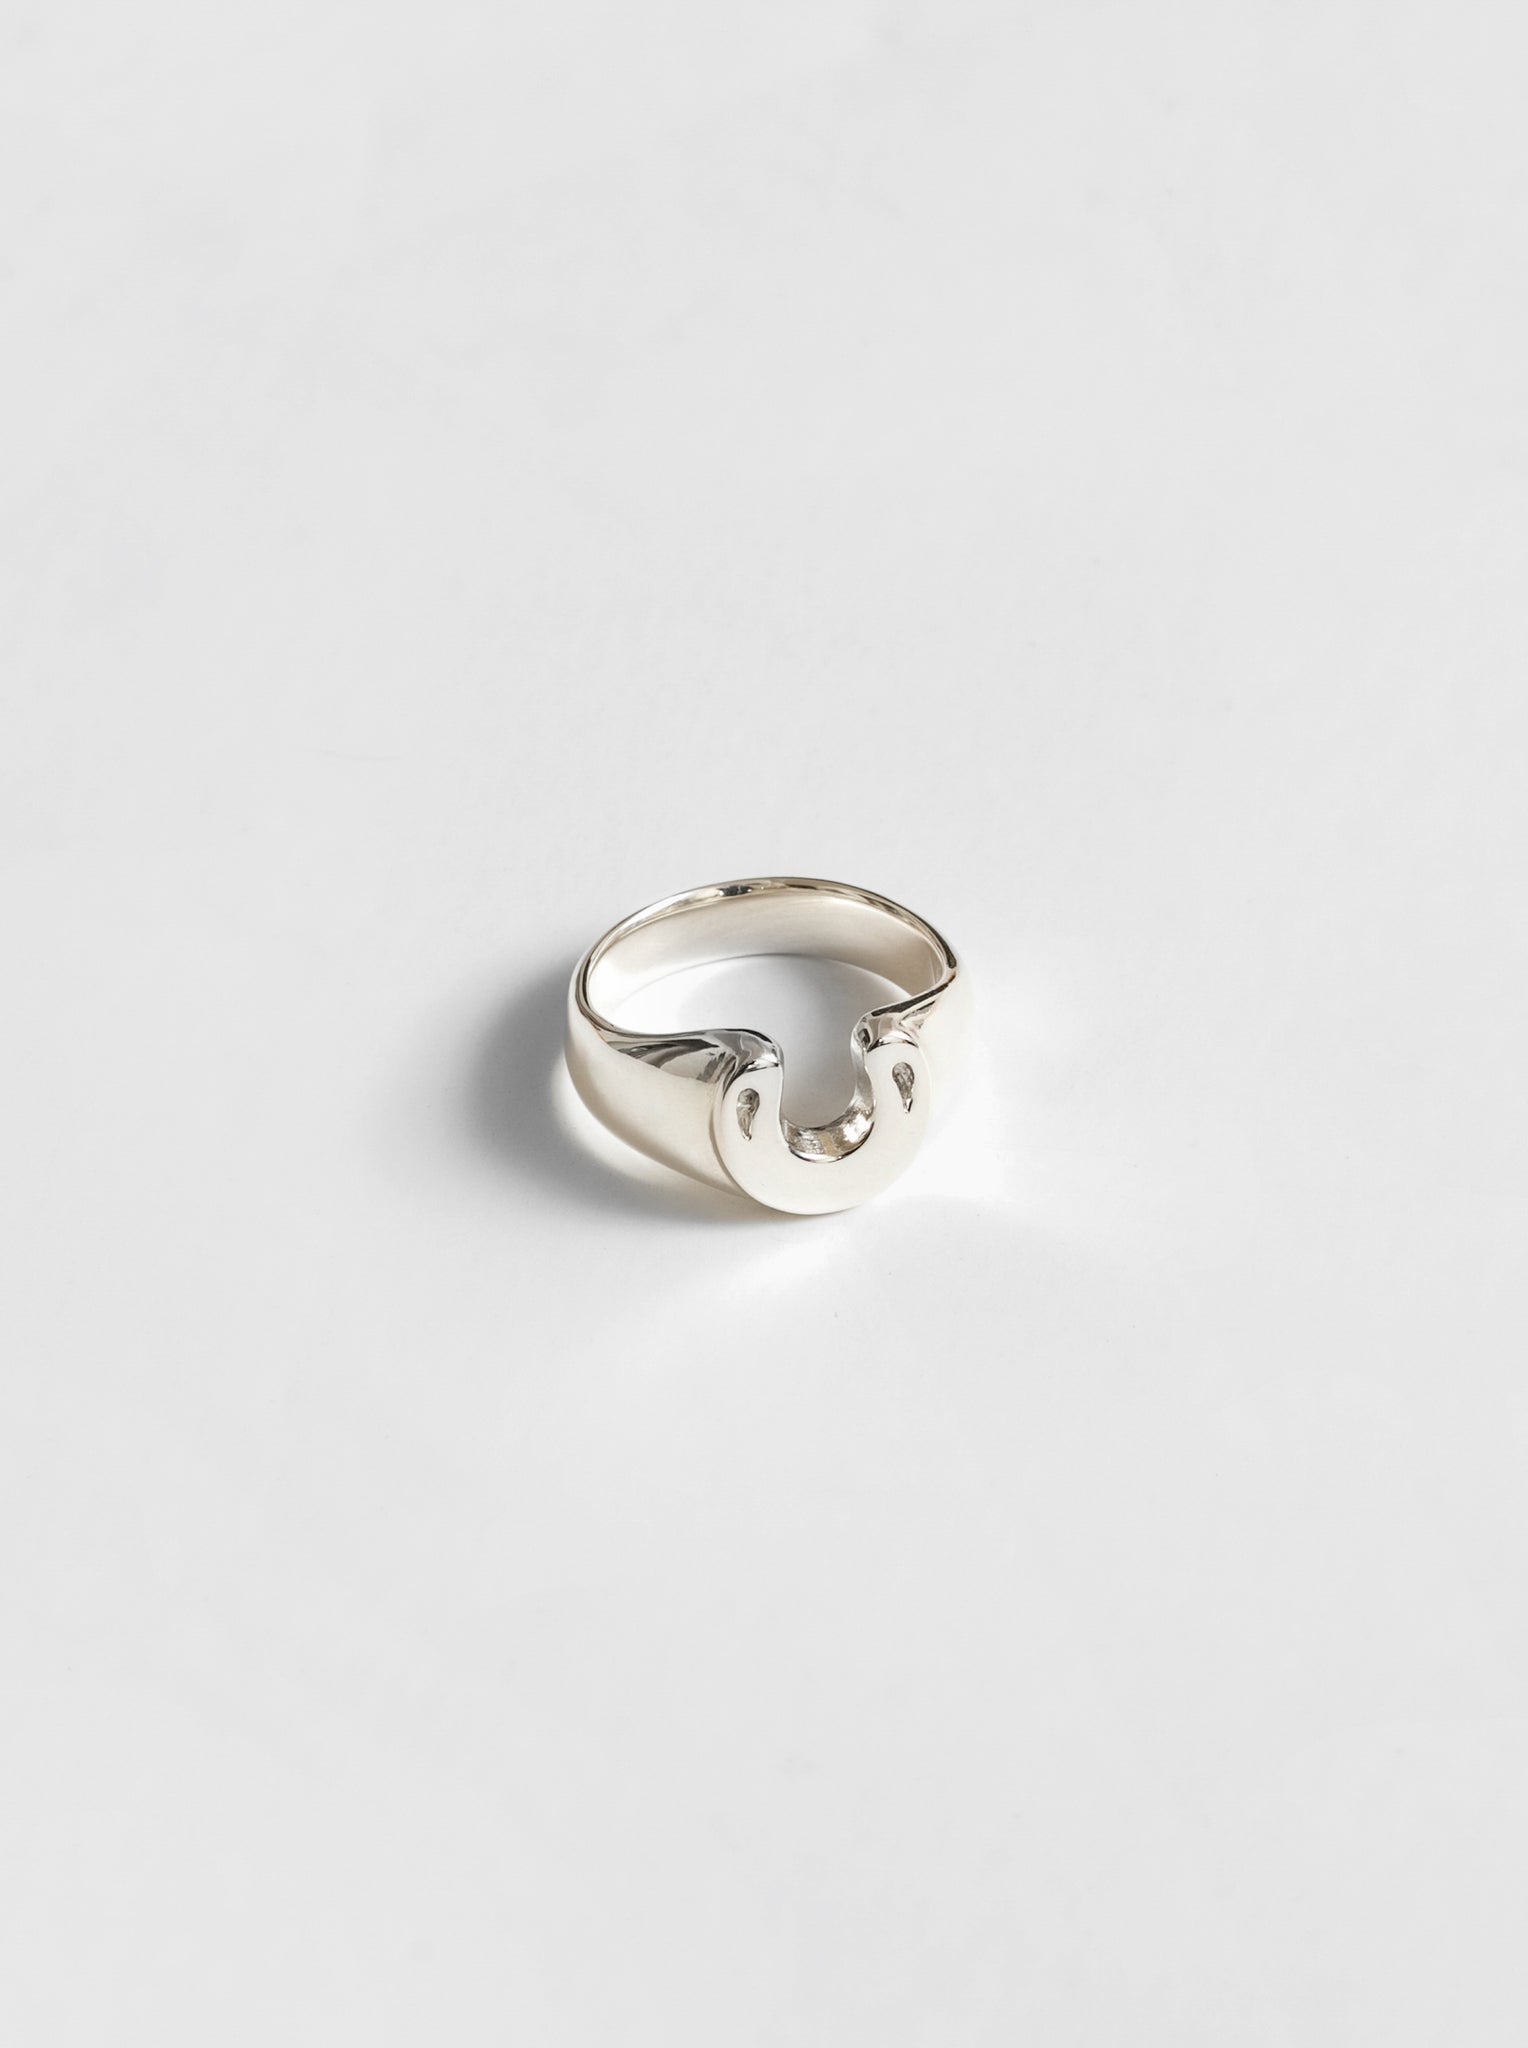 Wolf Circus Horseshoe Ring in Sterling Silver | Horseshoe Shaped Signet | Recycled Materials-Rings-wolfcircus.com